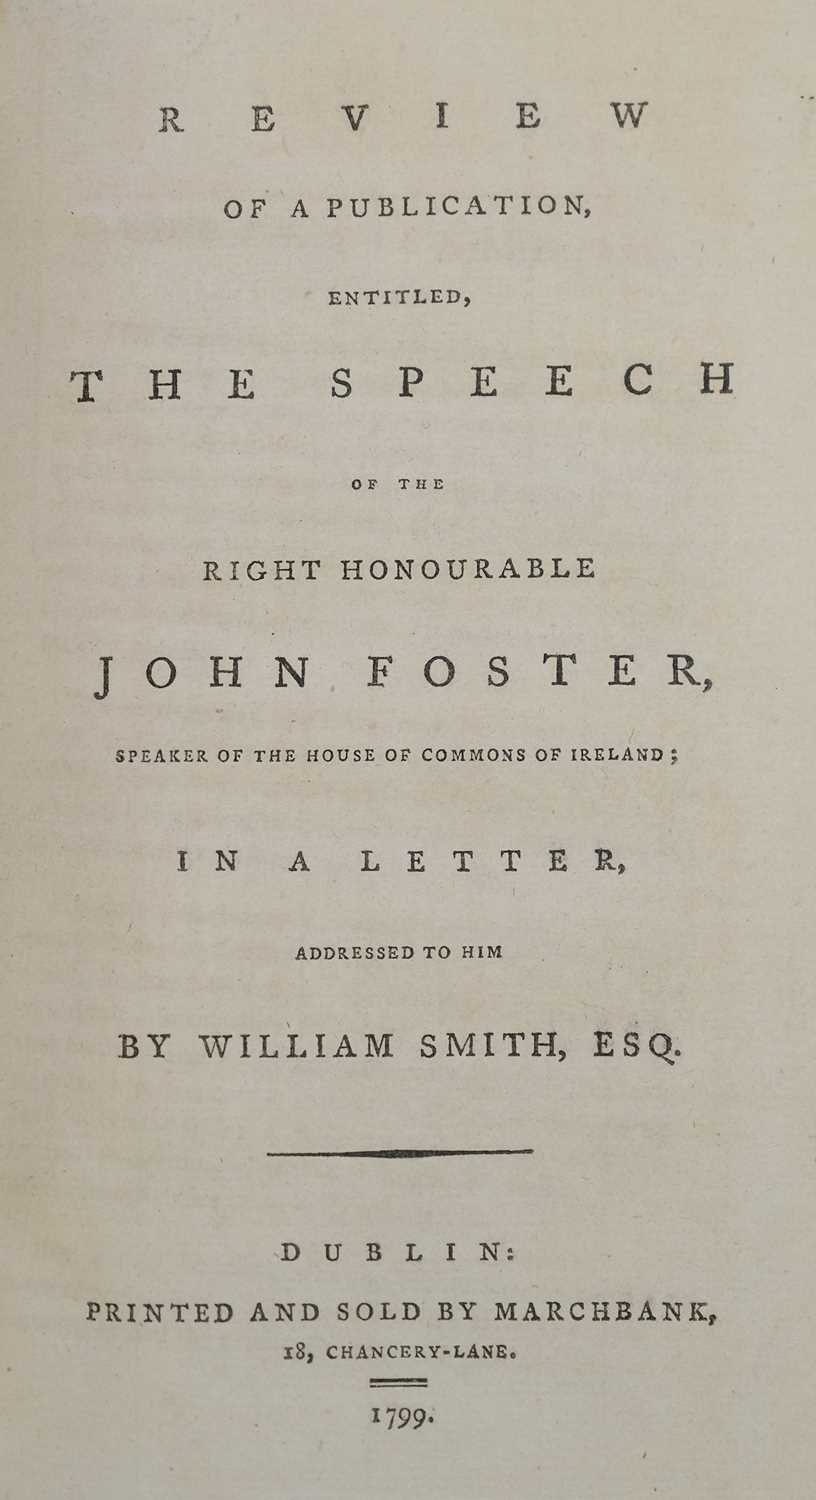 Lot 114 - Smith (William). Review of a Publication ... Speech of the Right Honourable John Foster, 1799